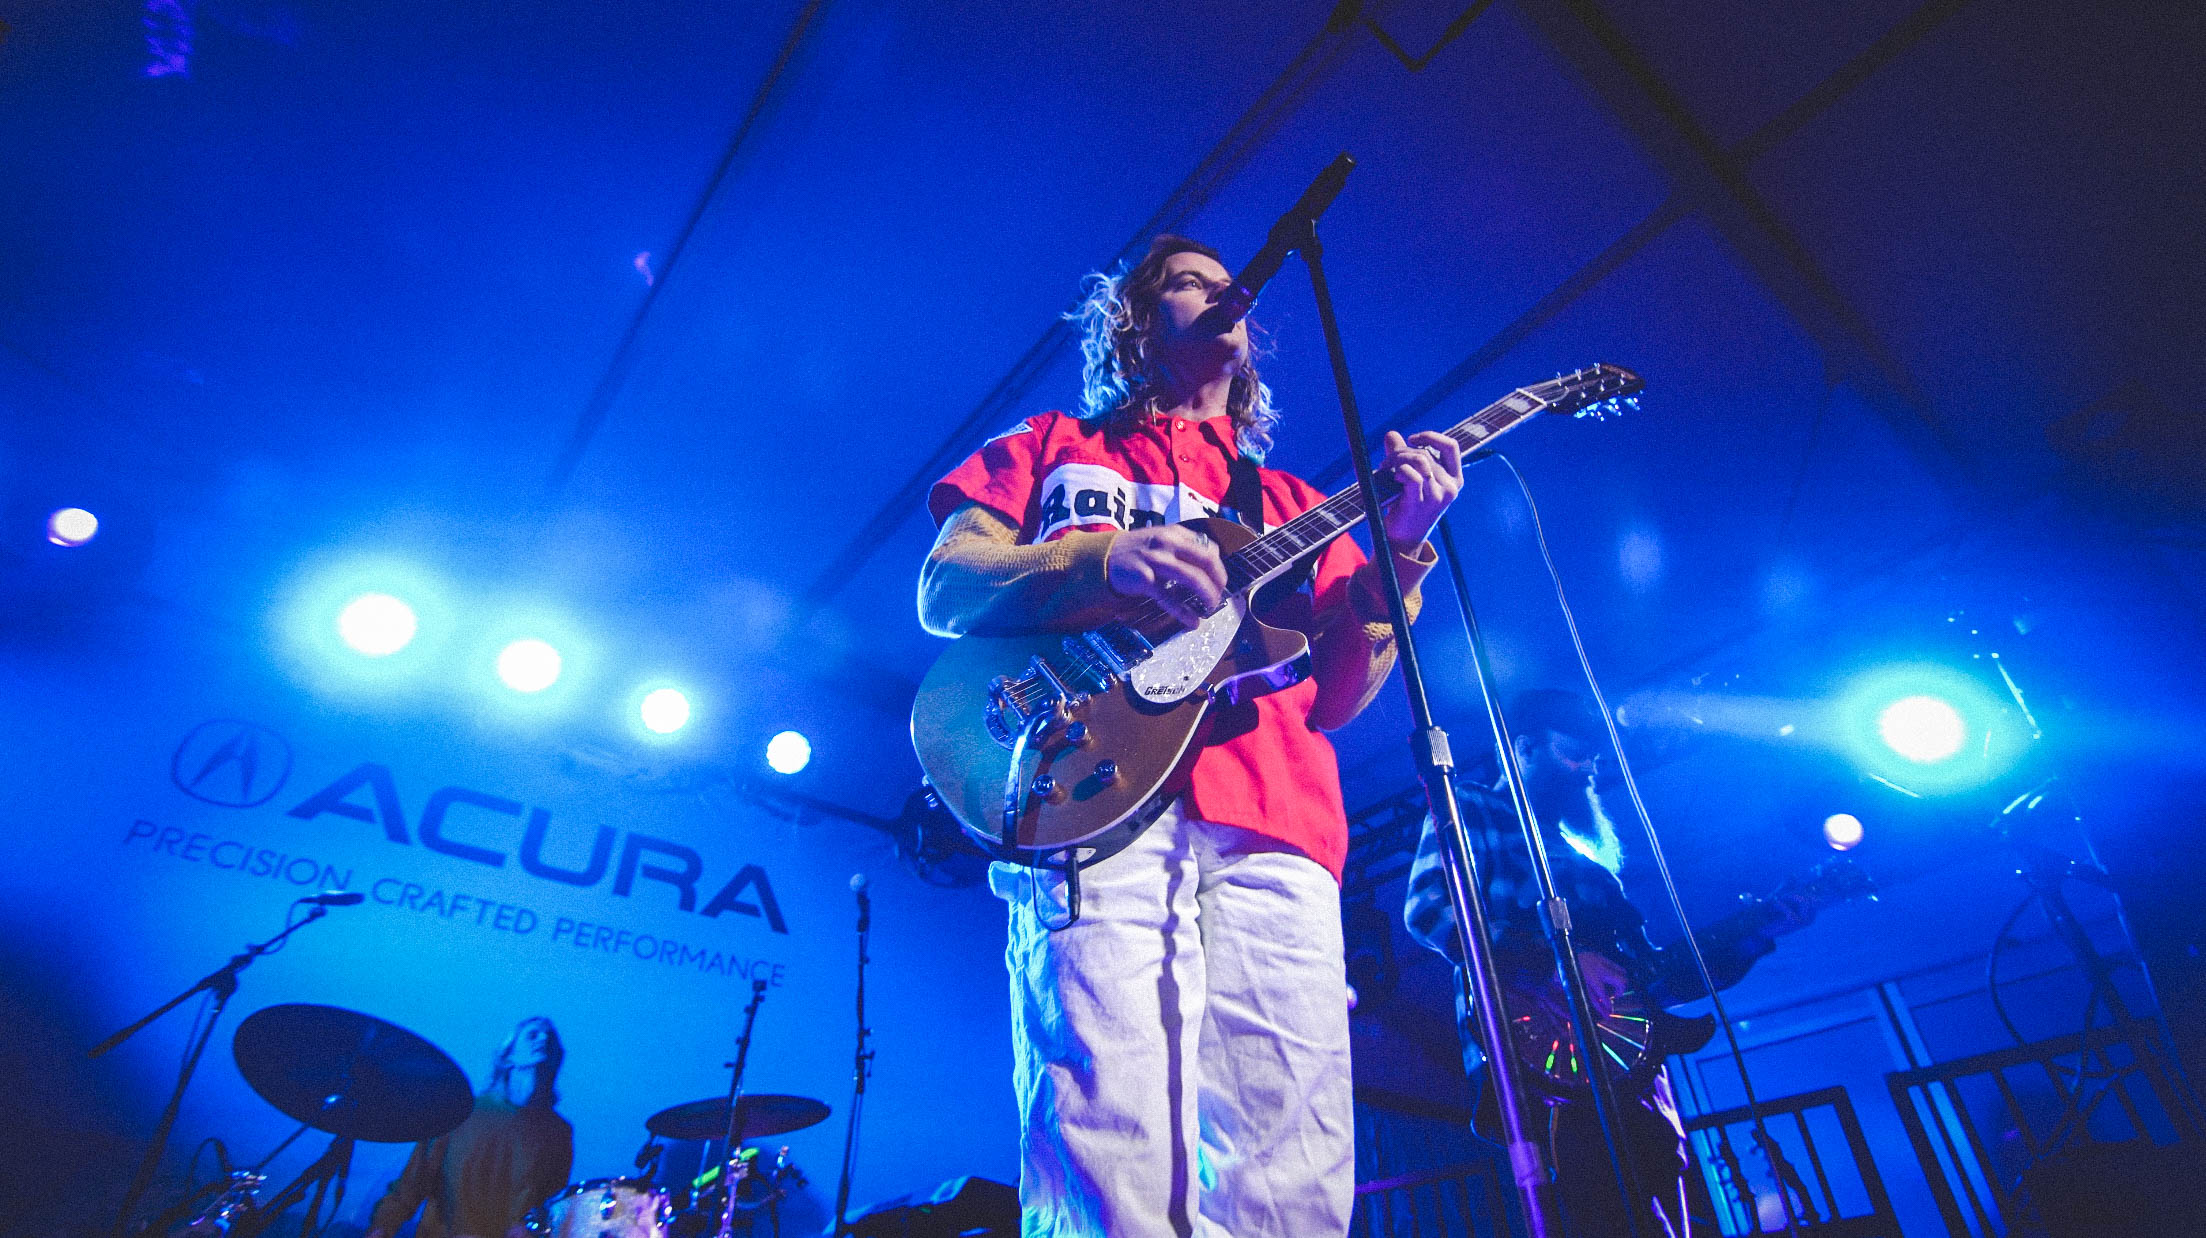 Performers onstage at the Acura Sundance Film Festival.